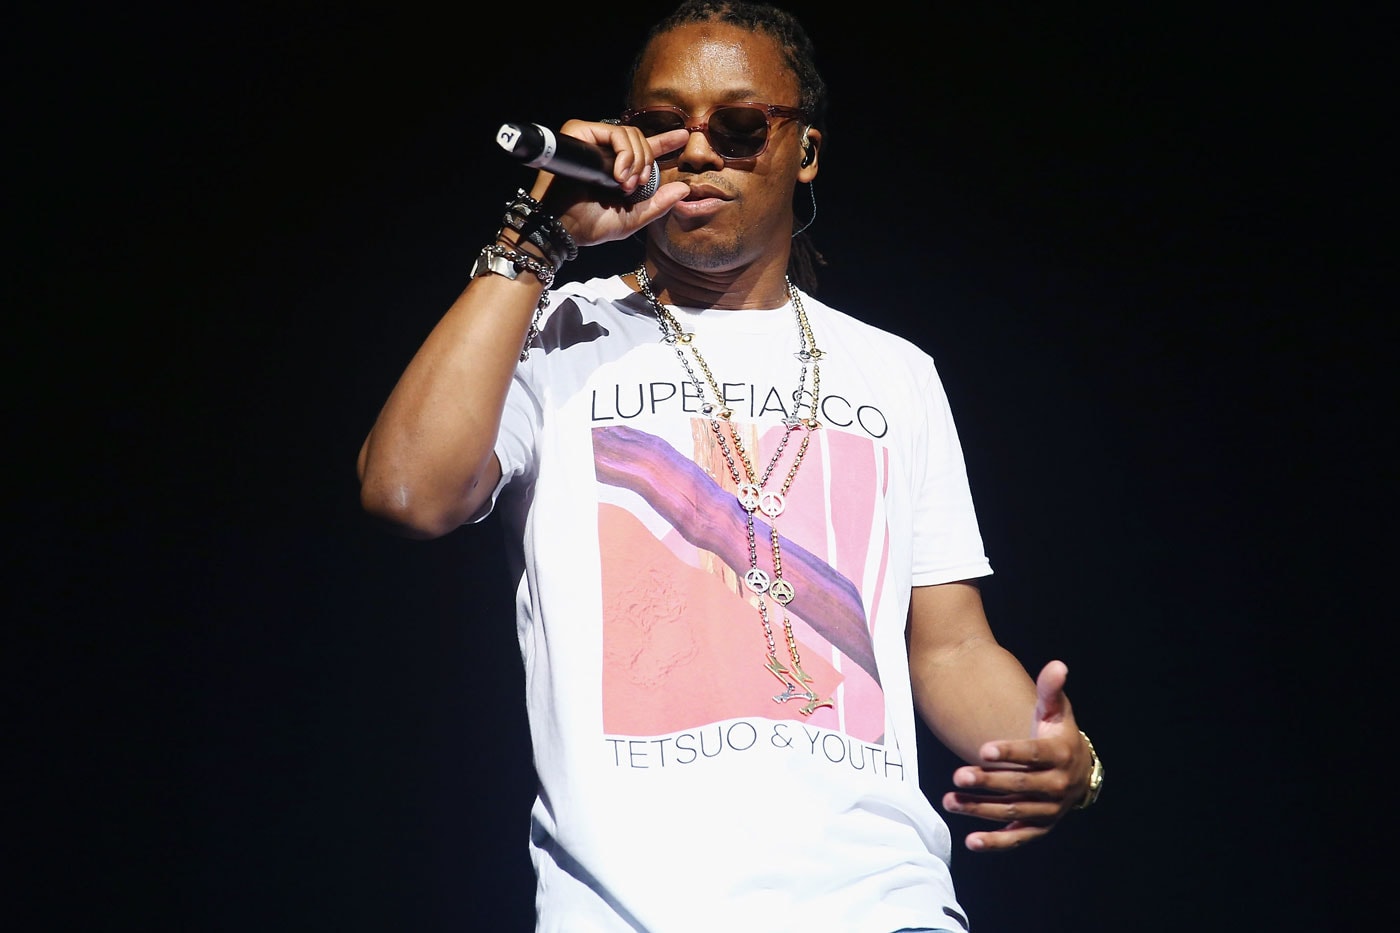 Lupe Fiasco Offers to Destroy Your Copy of 'Lasers' With a Laser